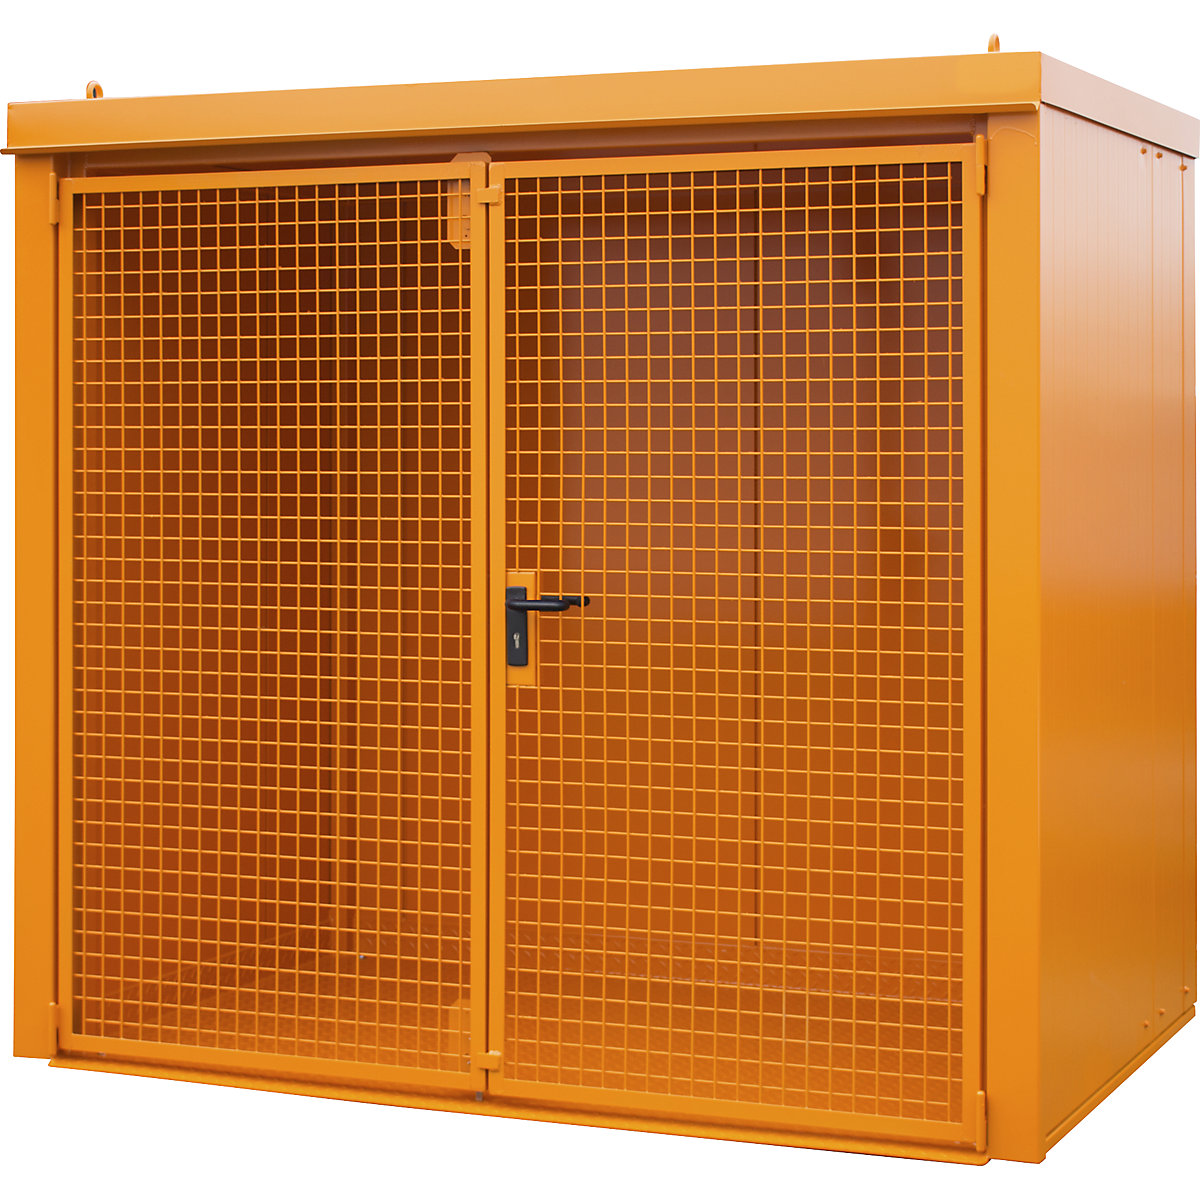 Gas cylinder container, fire resistant - eurokraft pro